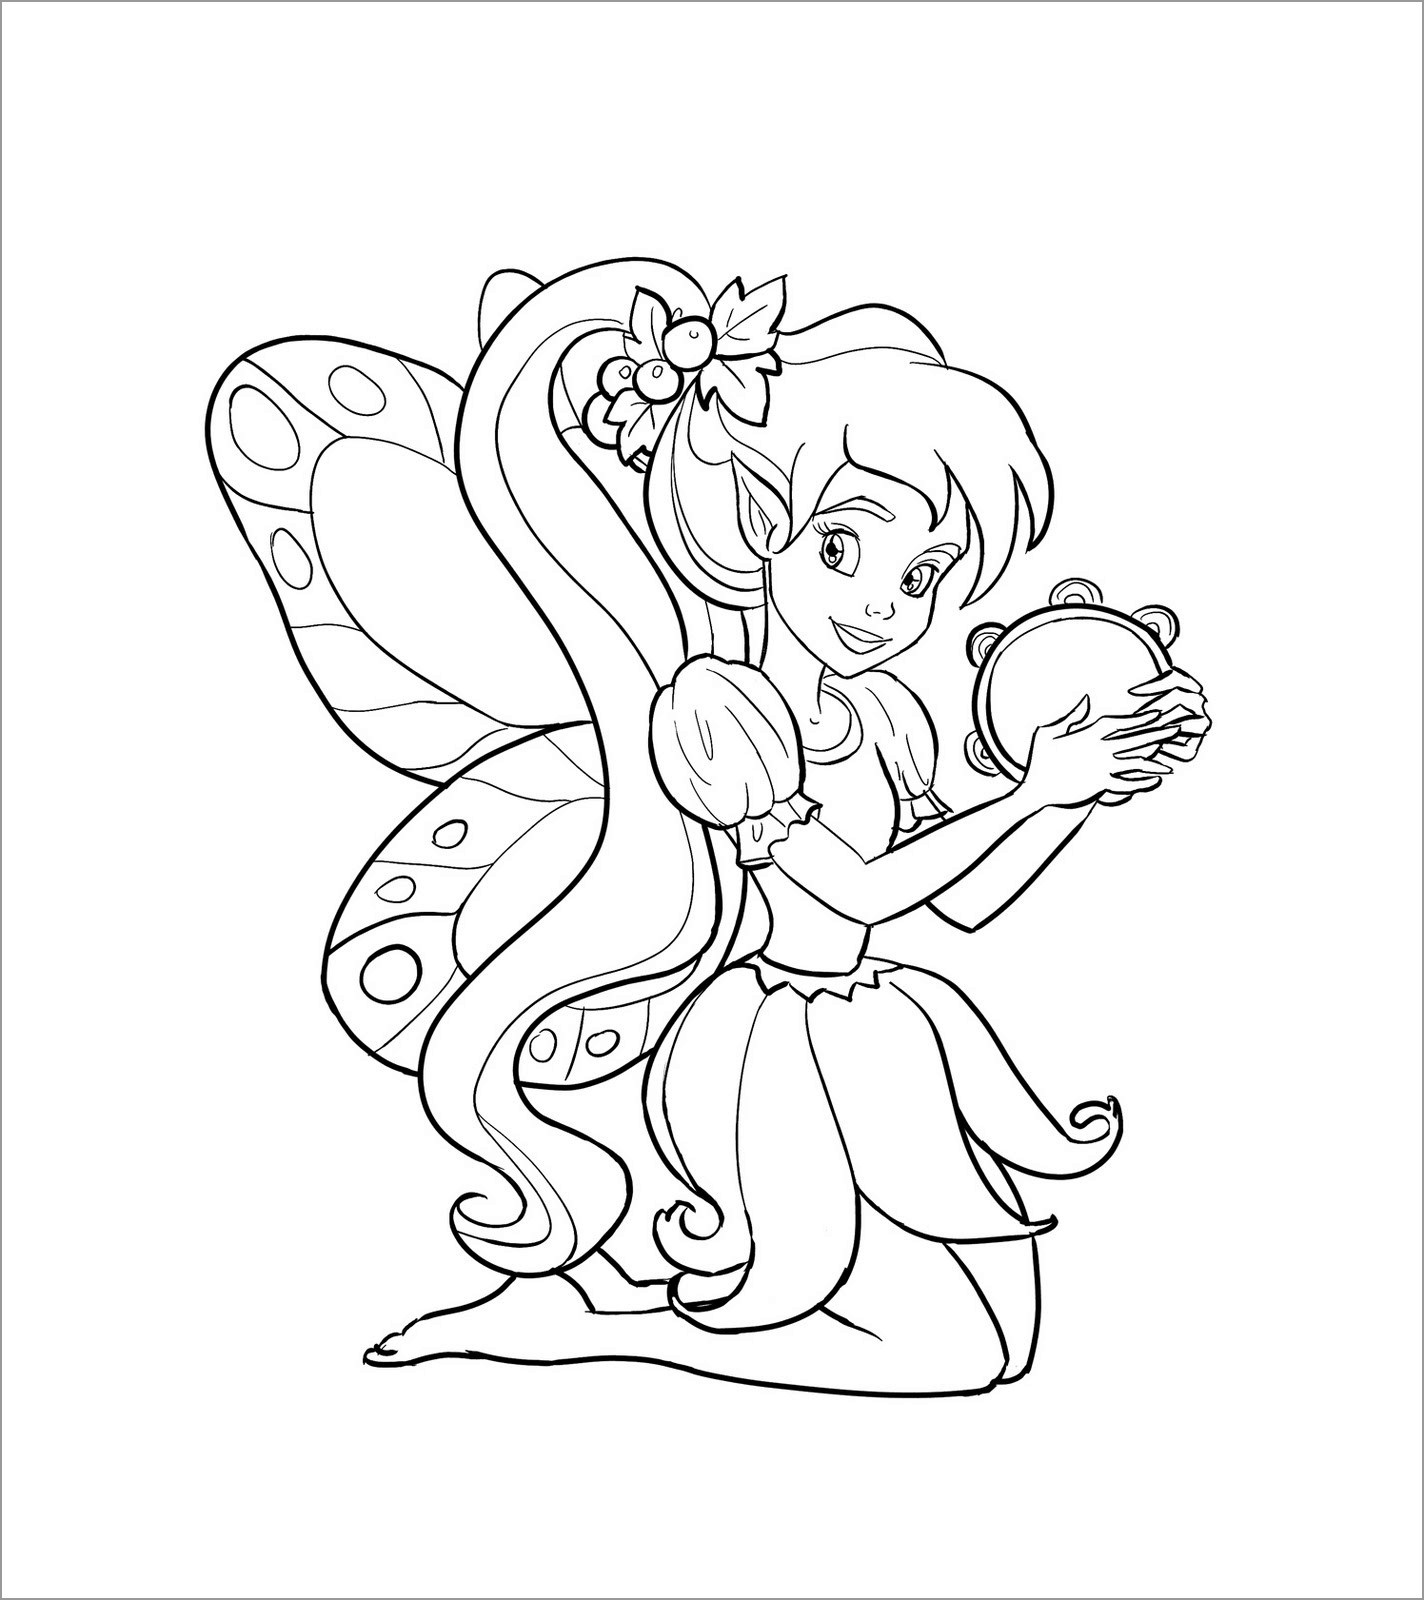 Free Printable Fairy Coloring Pages For Kids - Coloringbay - Free Printable Fairy Coloring Pictures